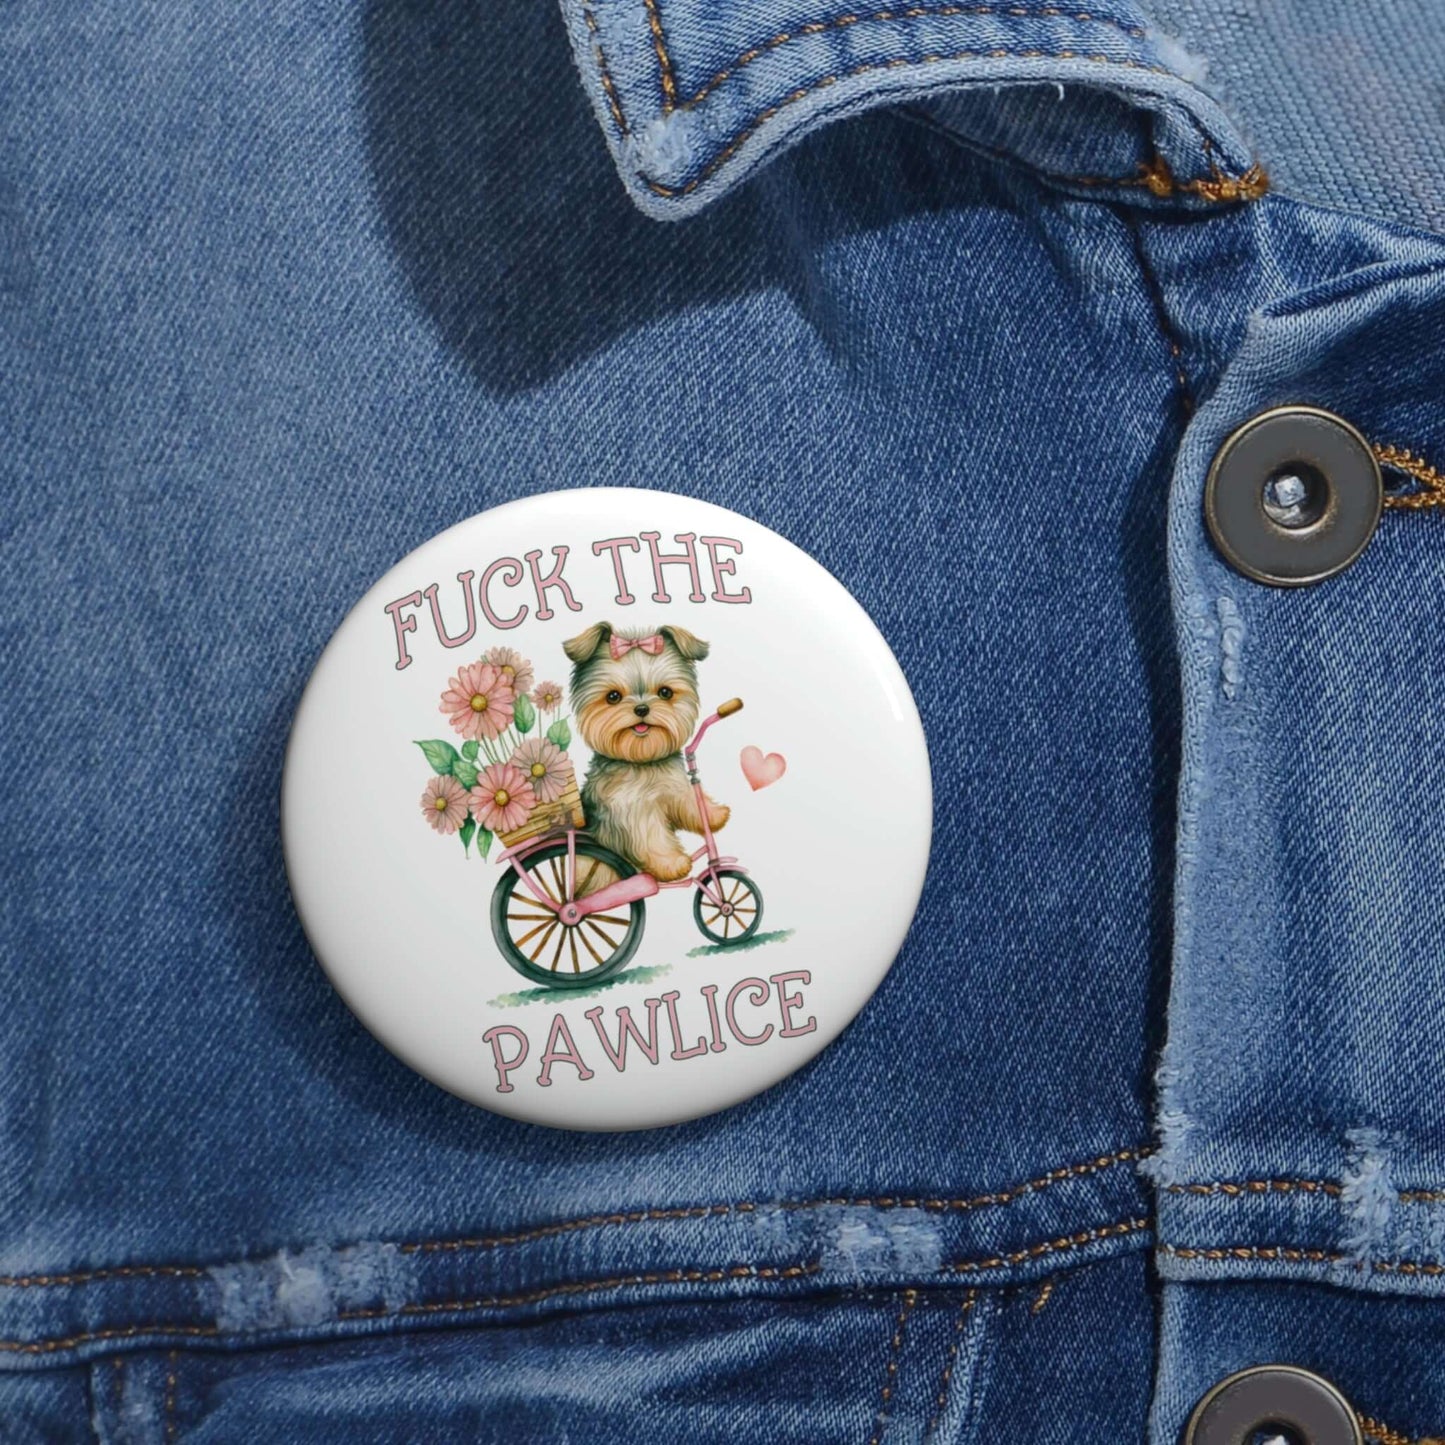 Fuck the pawlice cute puppy pin-back button